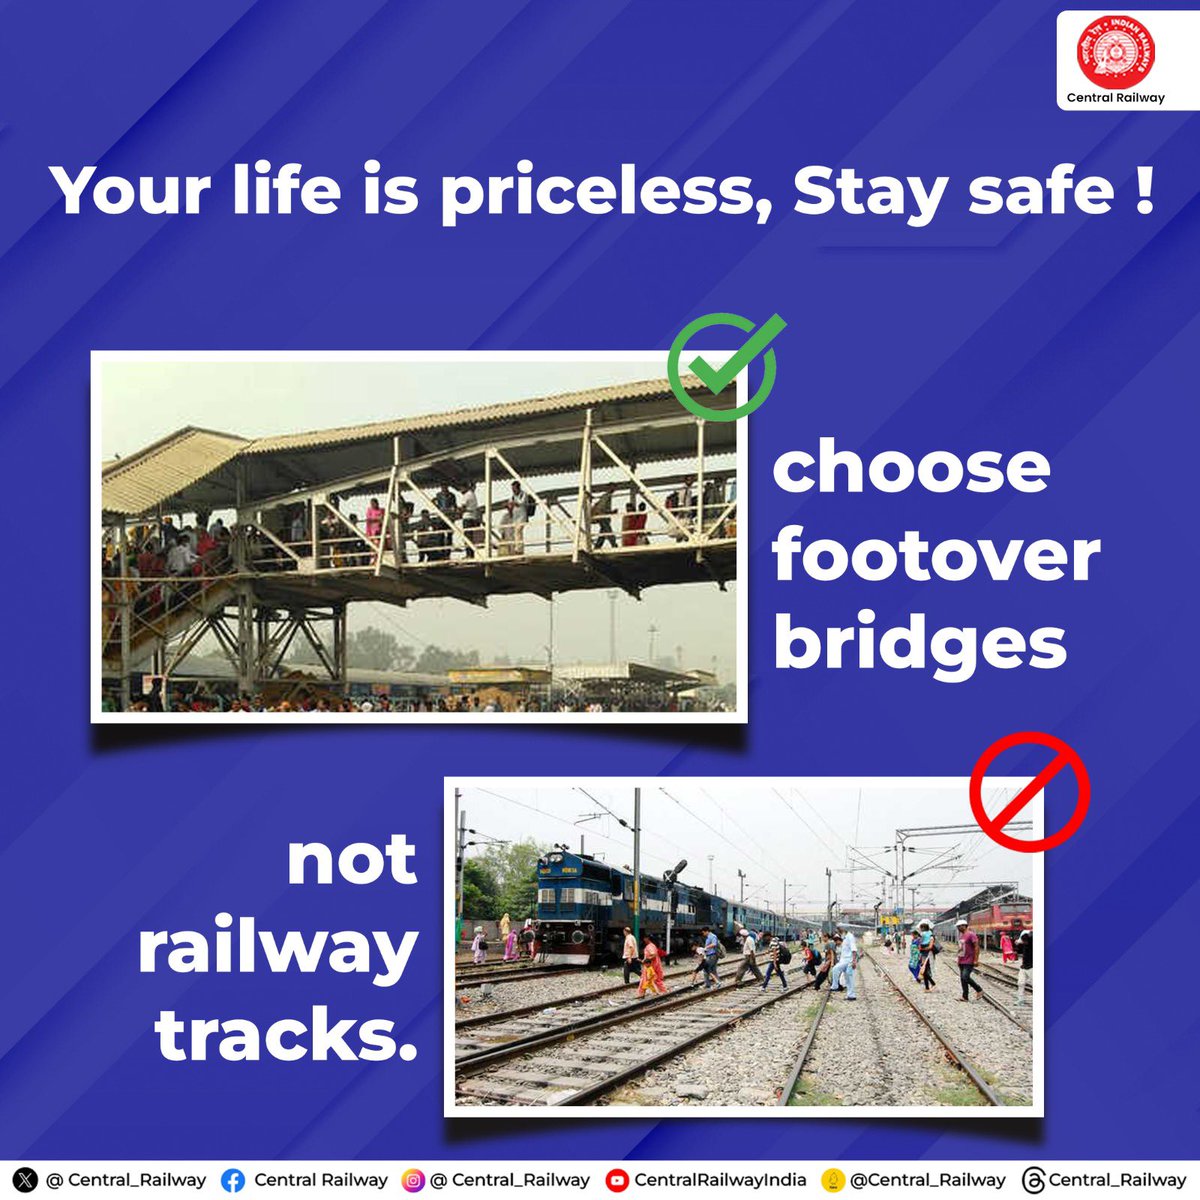 Crossing Railway tracks is illegal and extremely dangerous. Prioritise safety, and use FOB for crossing Railway lines.
#CentralRailway #RailwayRules